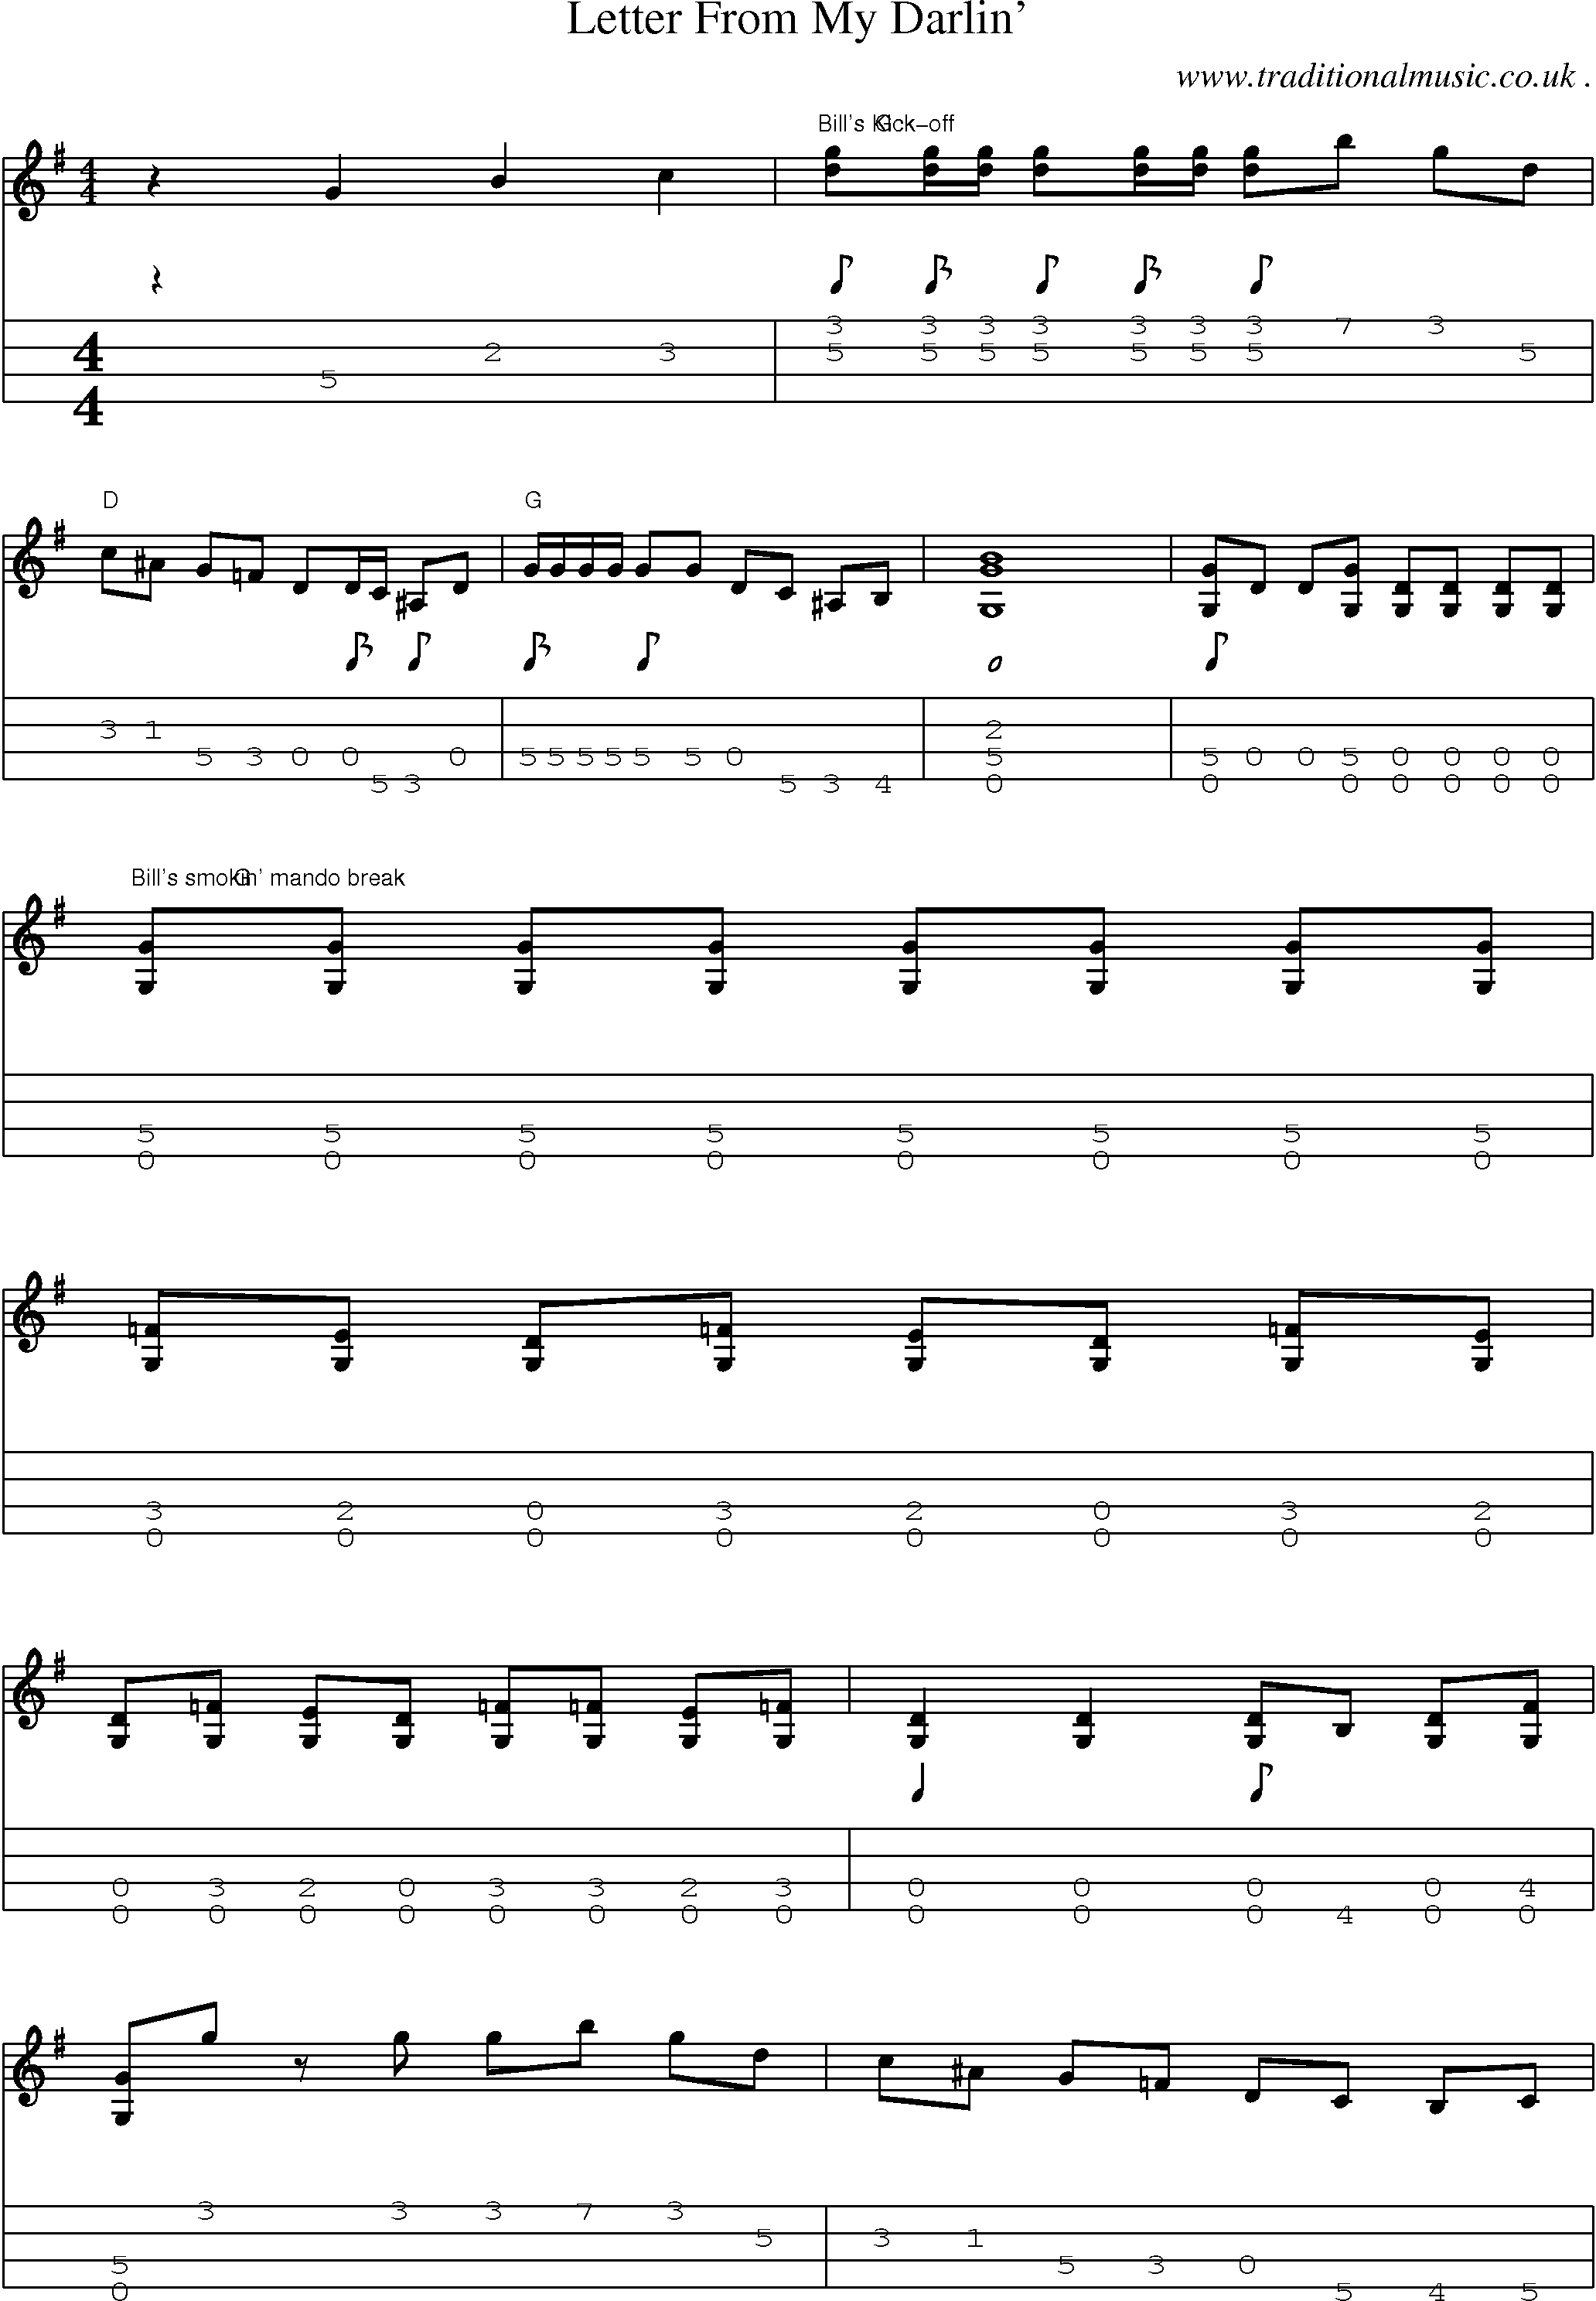 Music Score and Guitar Tabs for Letter From My Darlin